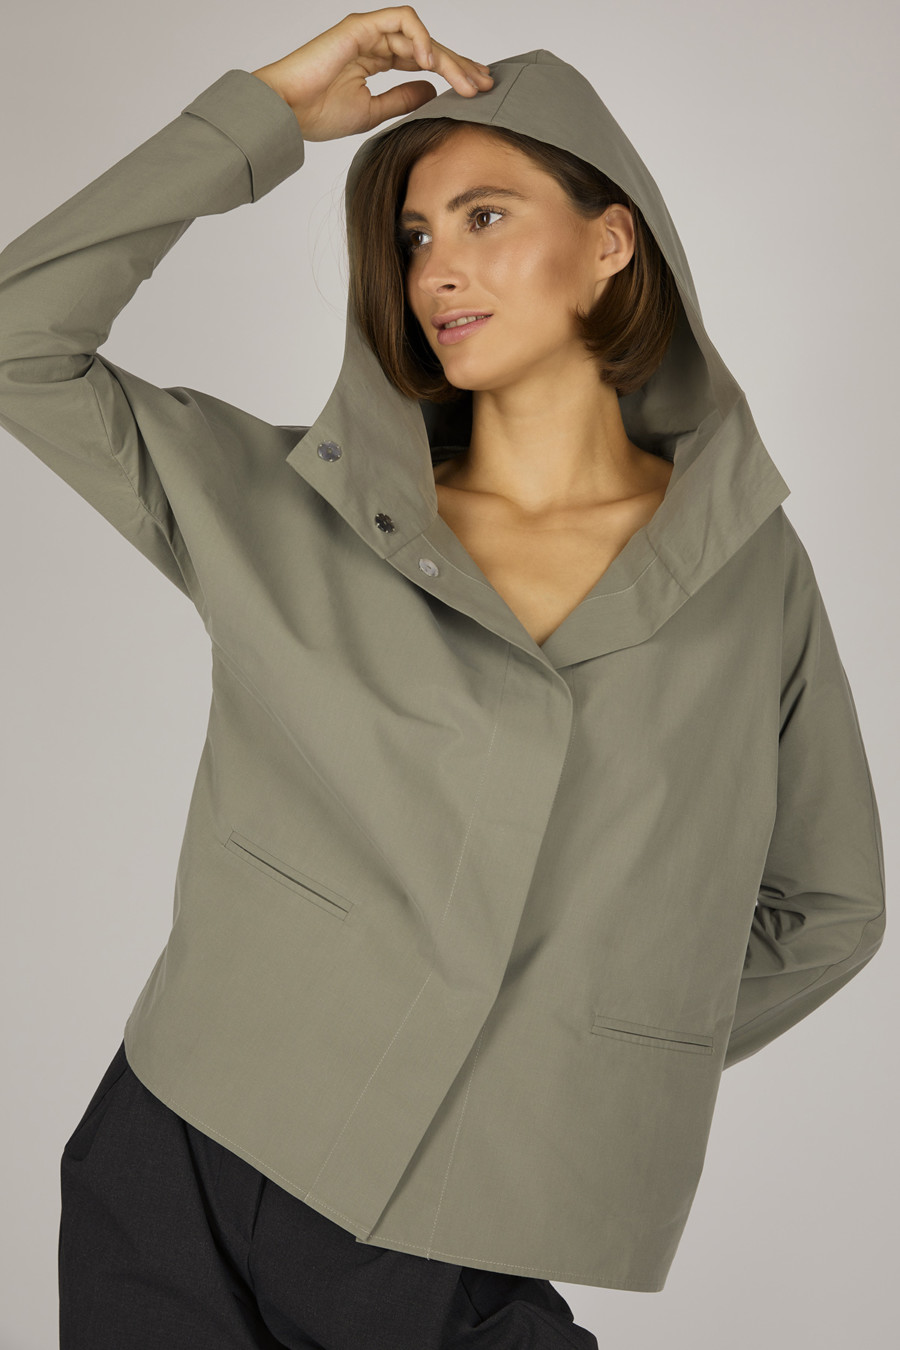 ANGELA – Cotton blouse with hood – Color: Vetiver